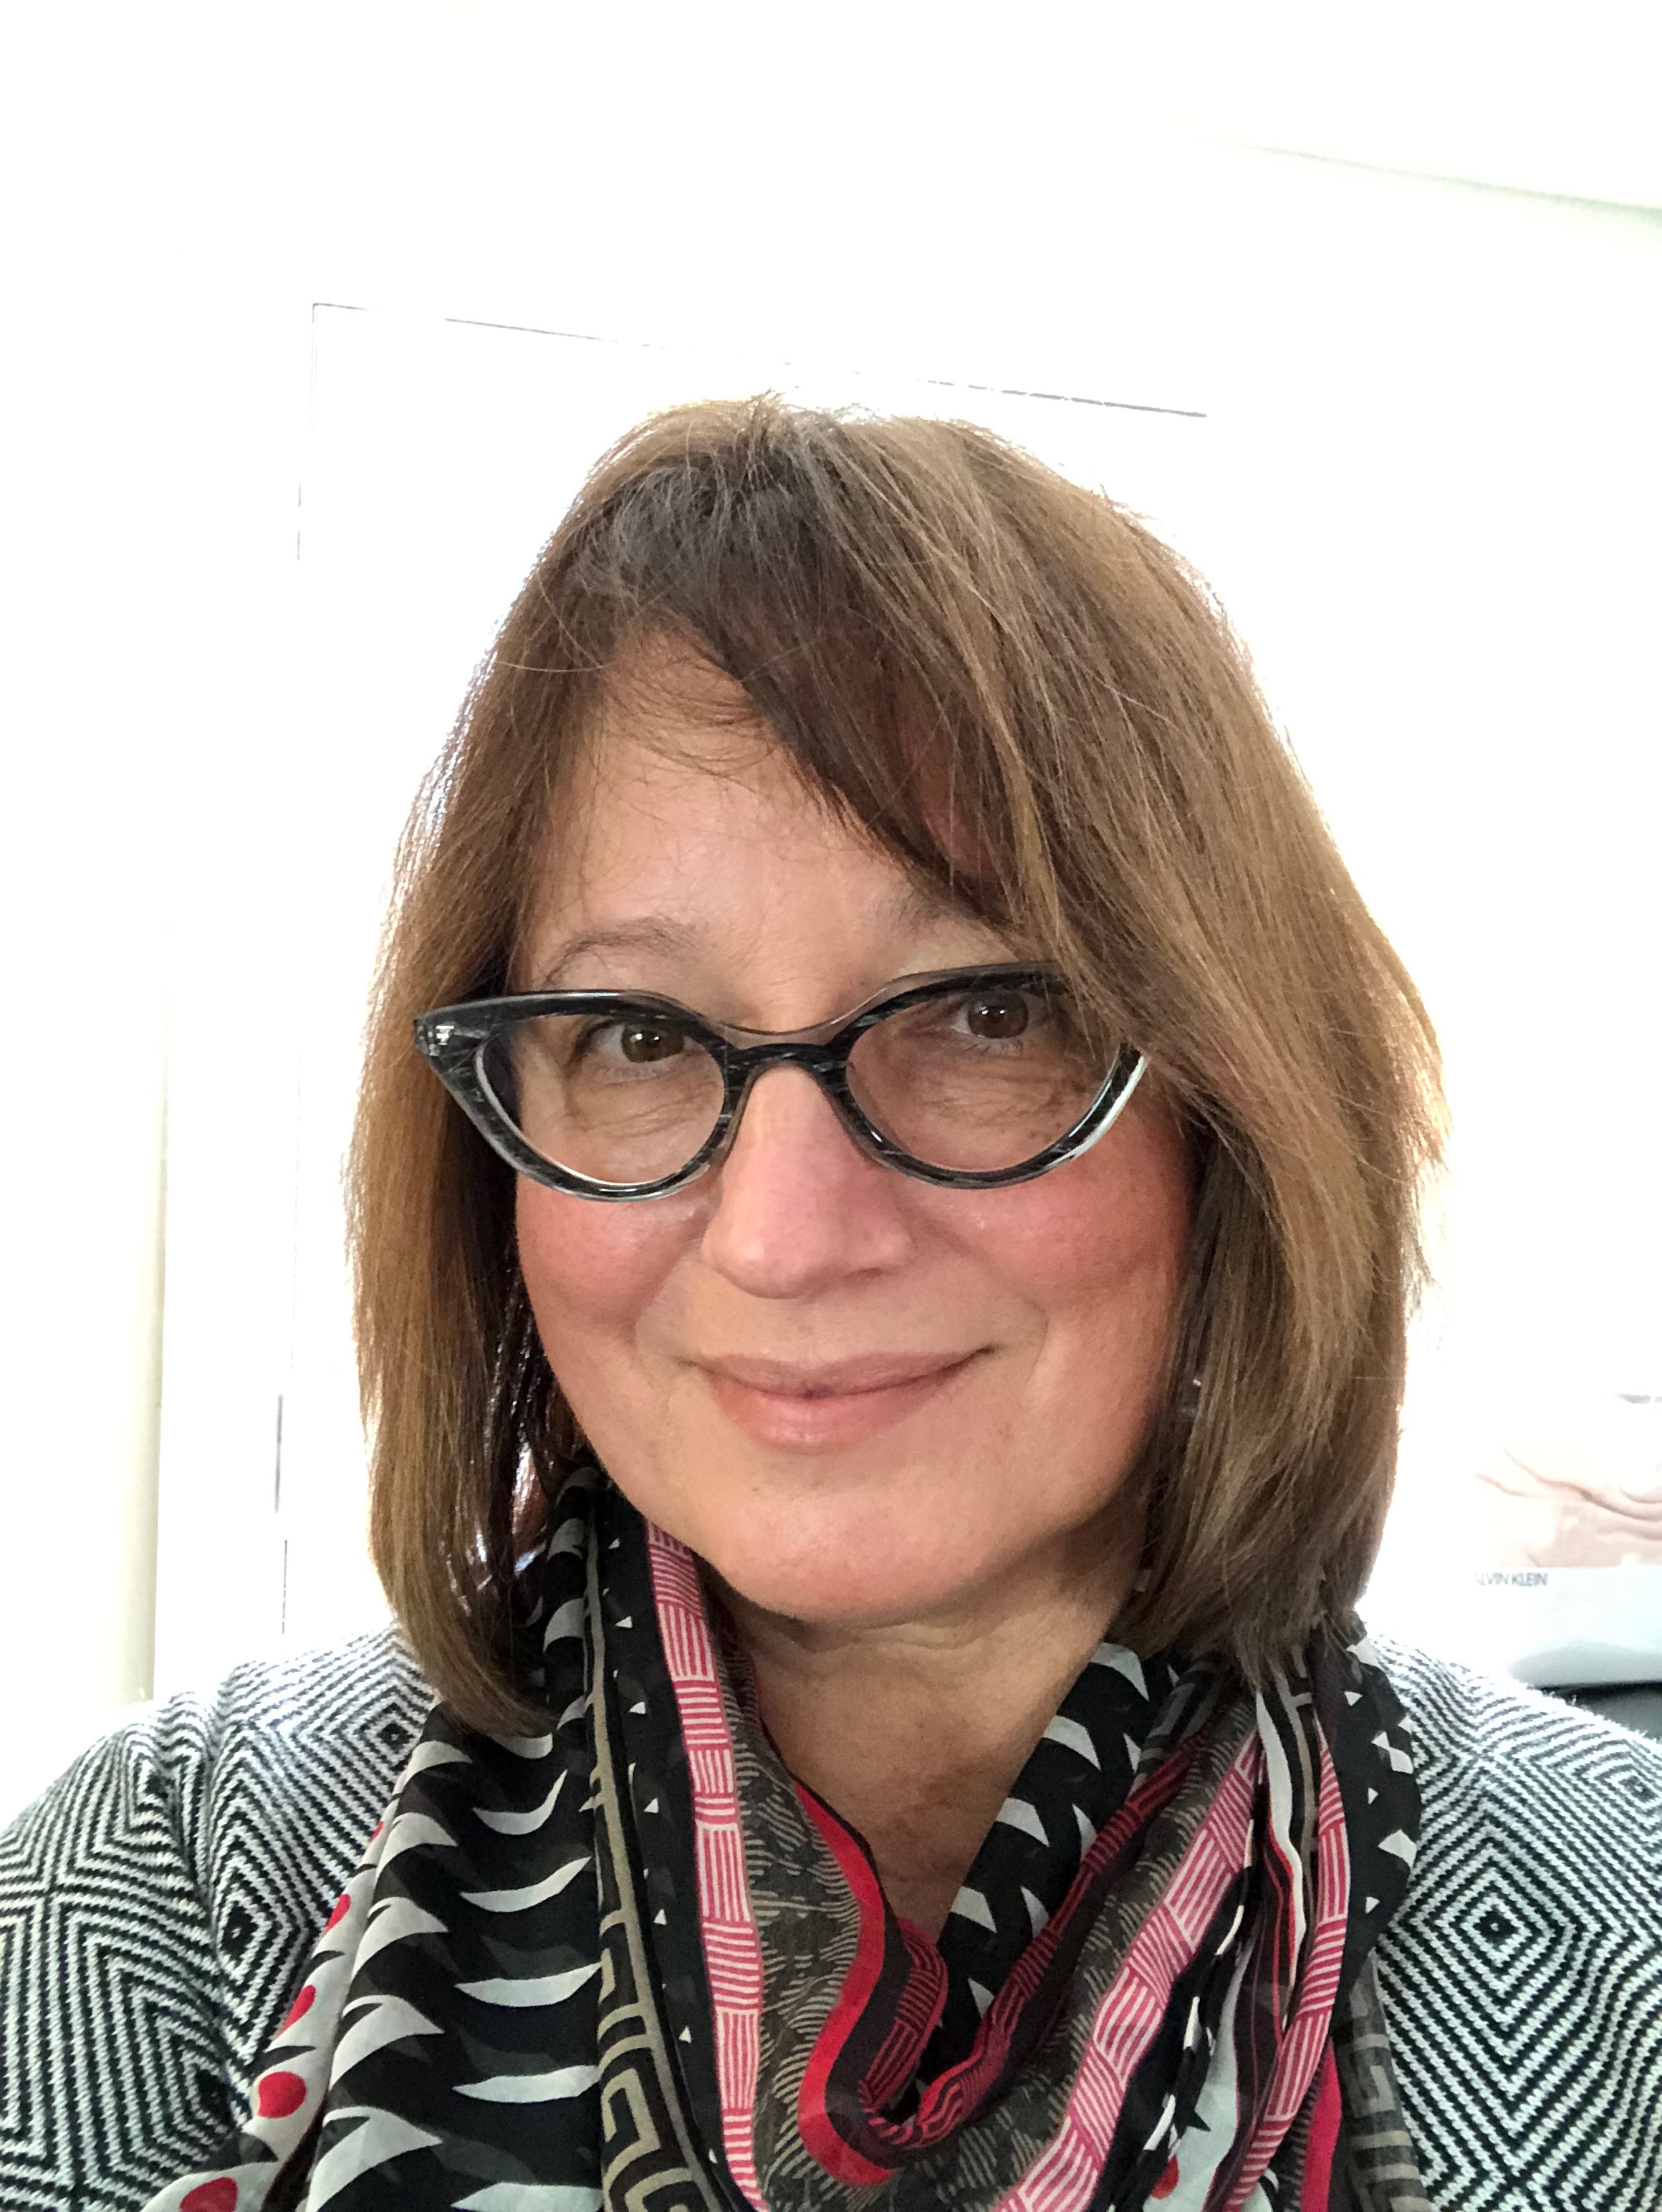 2019 Election Director of Membership Services Candidate Lilia Pavlovsky